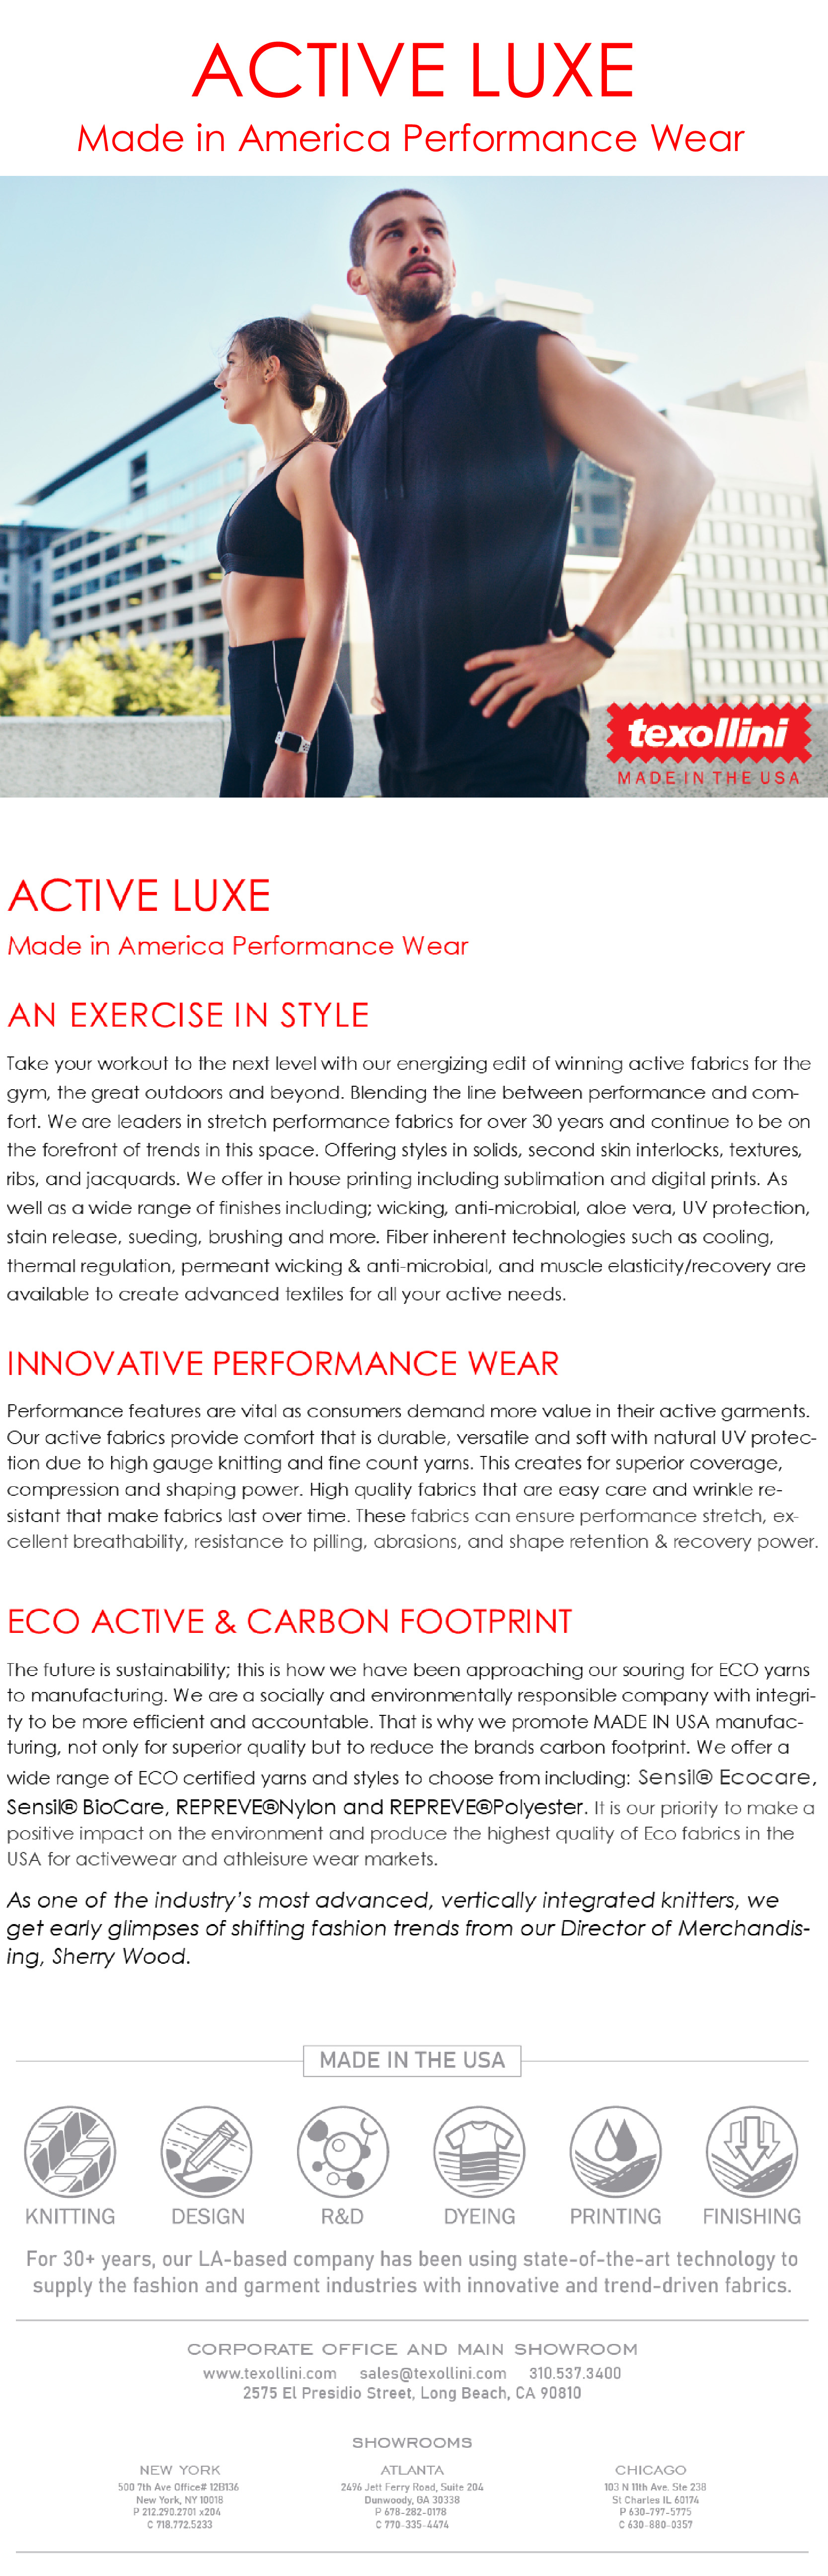 ACTIVE LUXE